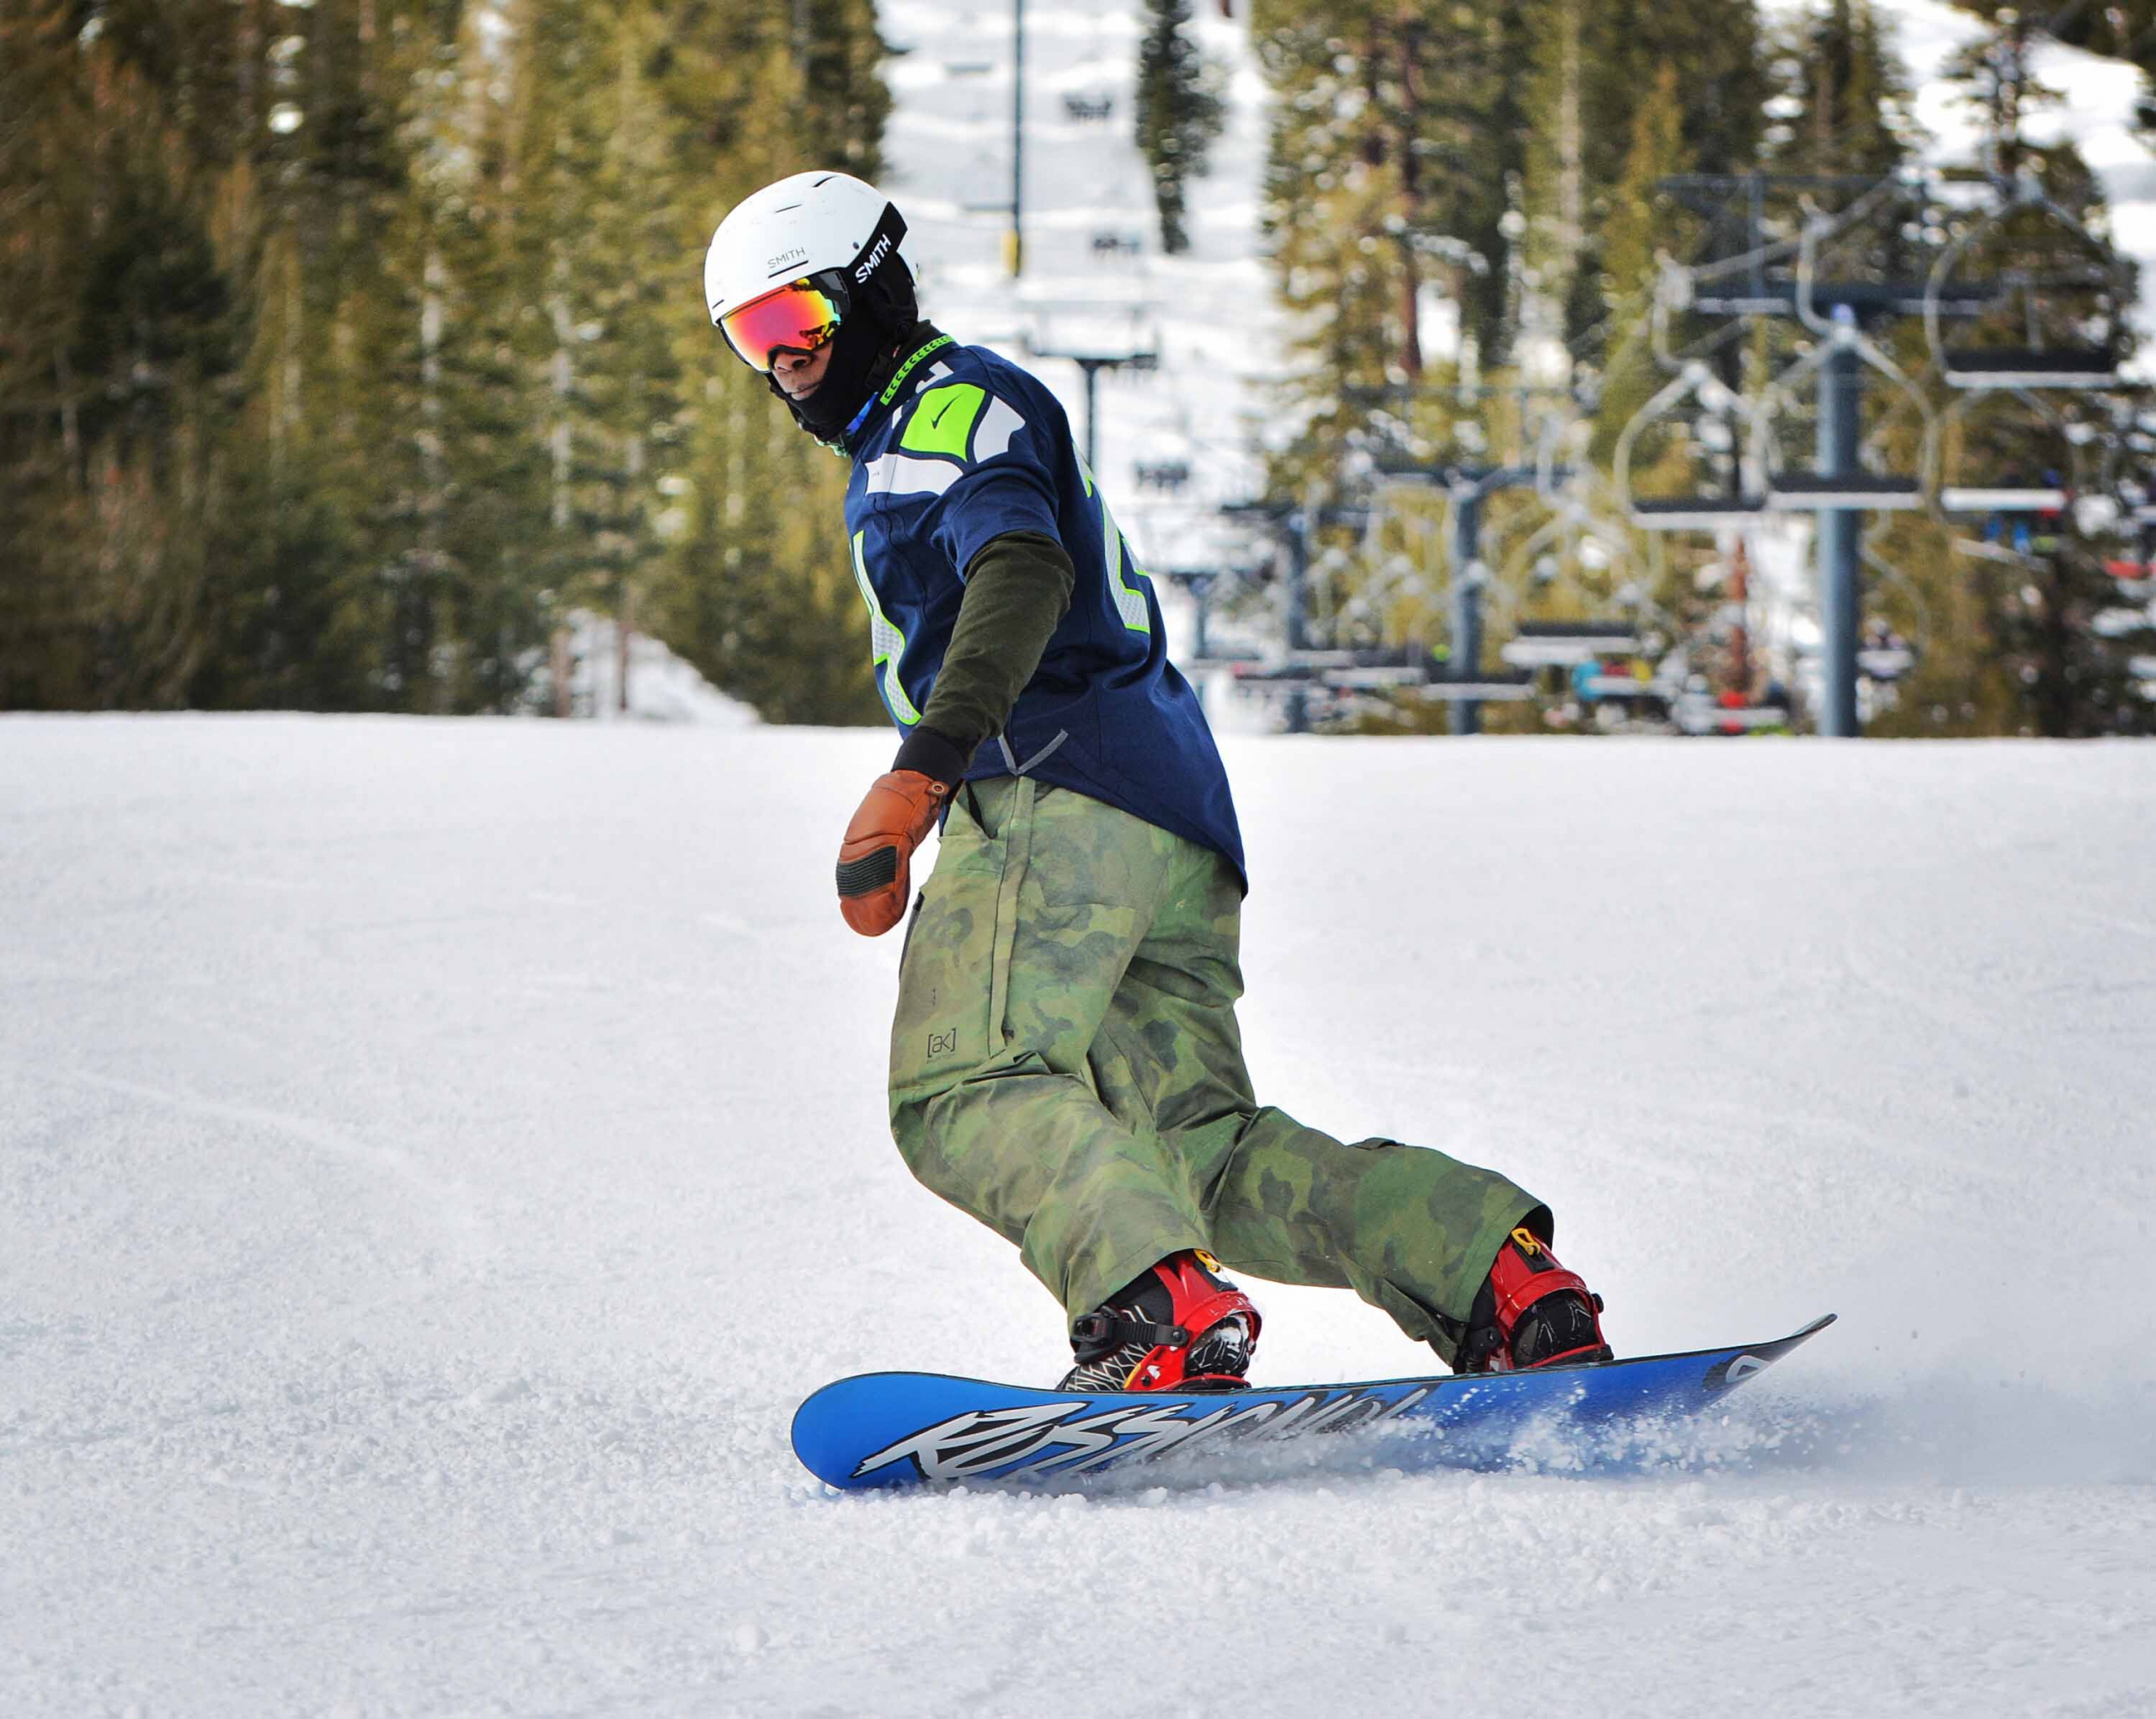 PSIA-AASI Member Marshal Titus snowboard in a Seattle Seahawks jersey